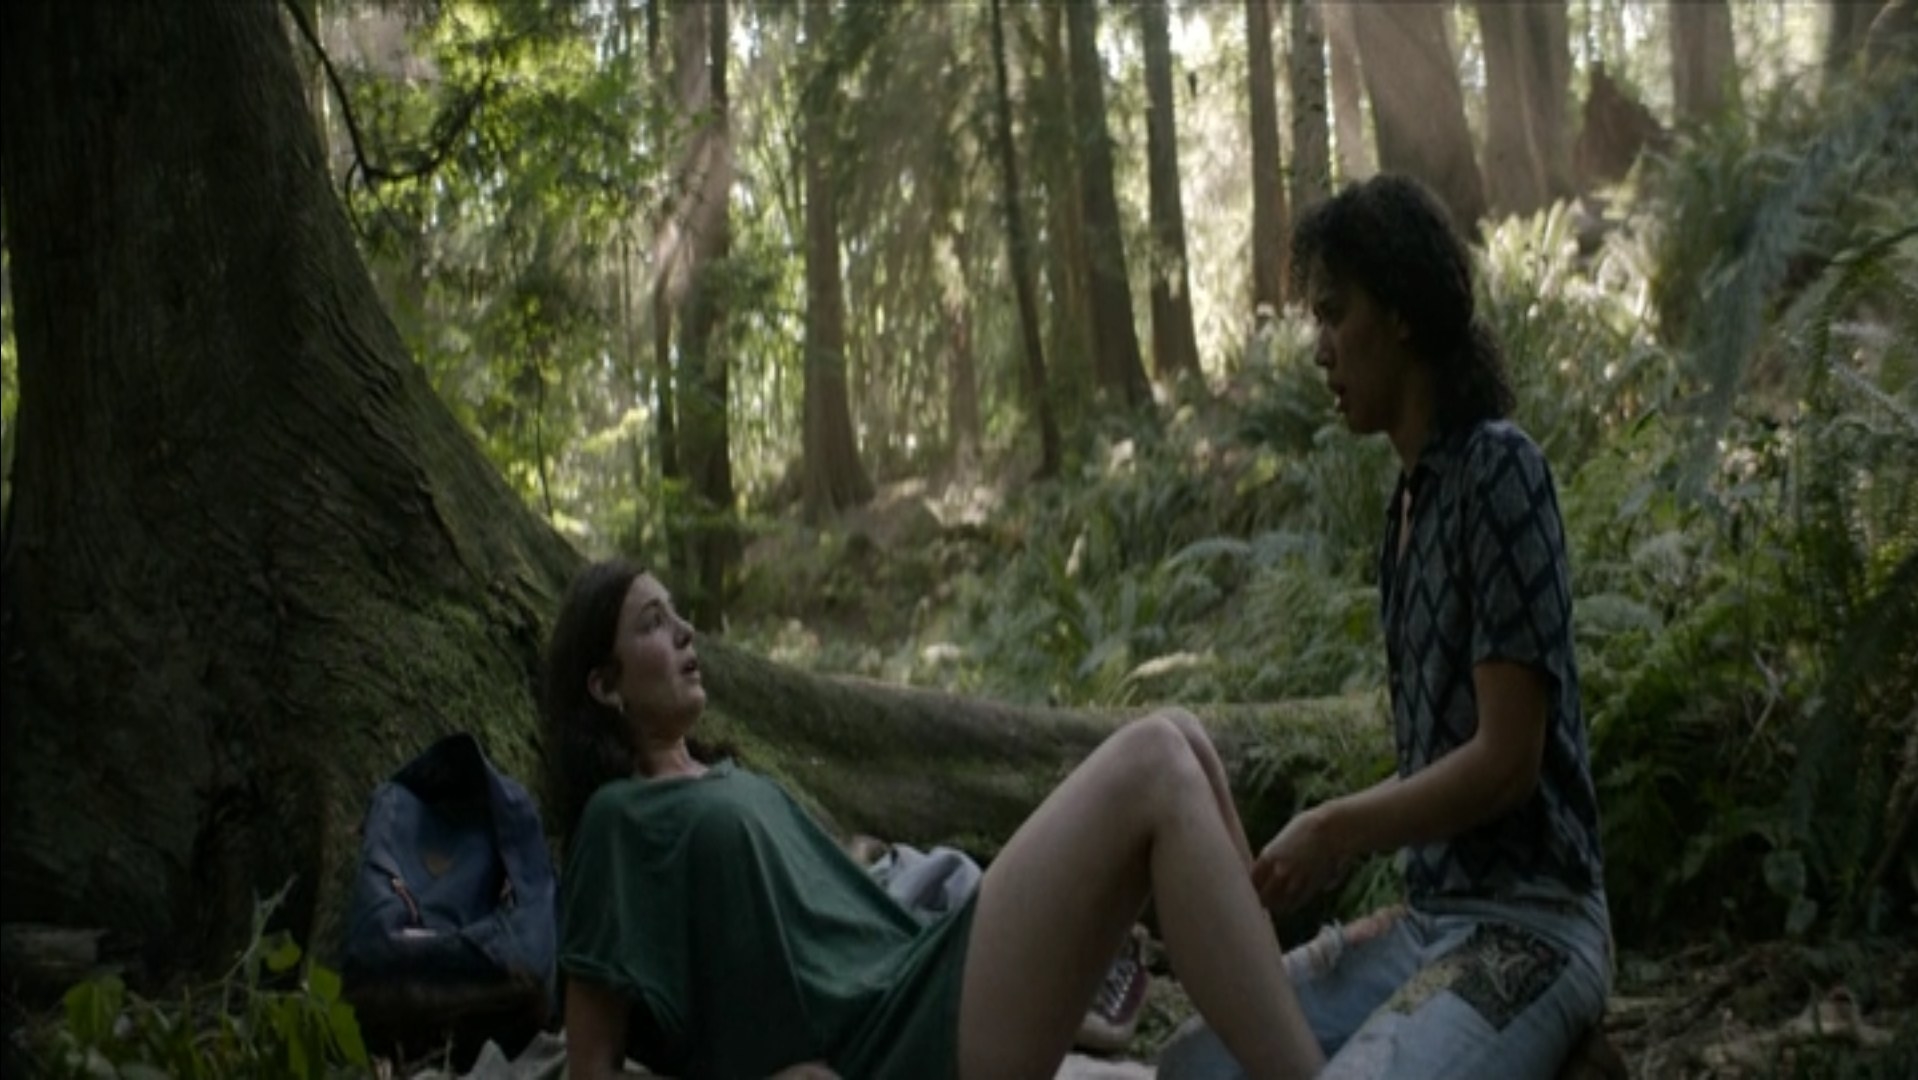 A girl lies on the forest floor in lithotomy position and her friend is about to insert a metal wire in her uterus